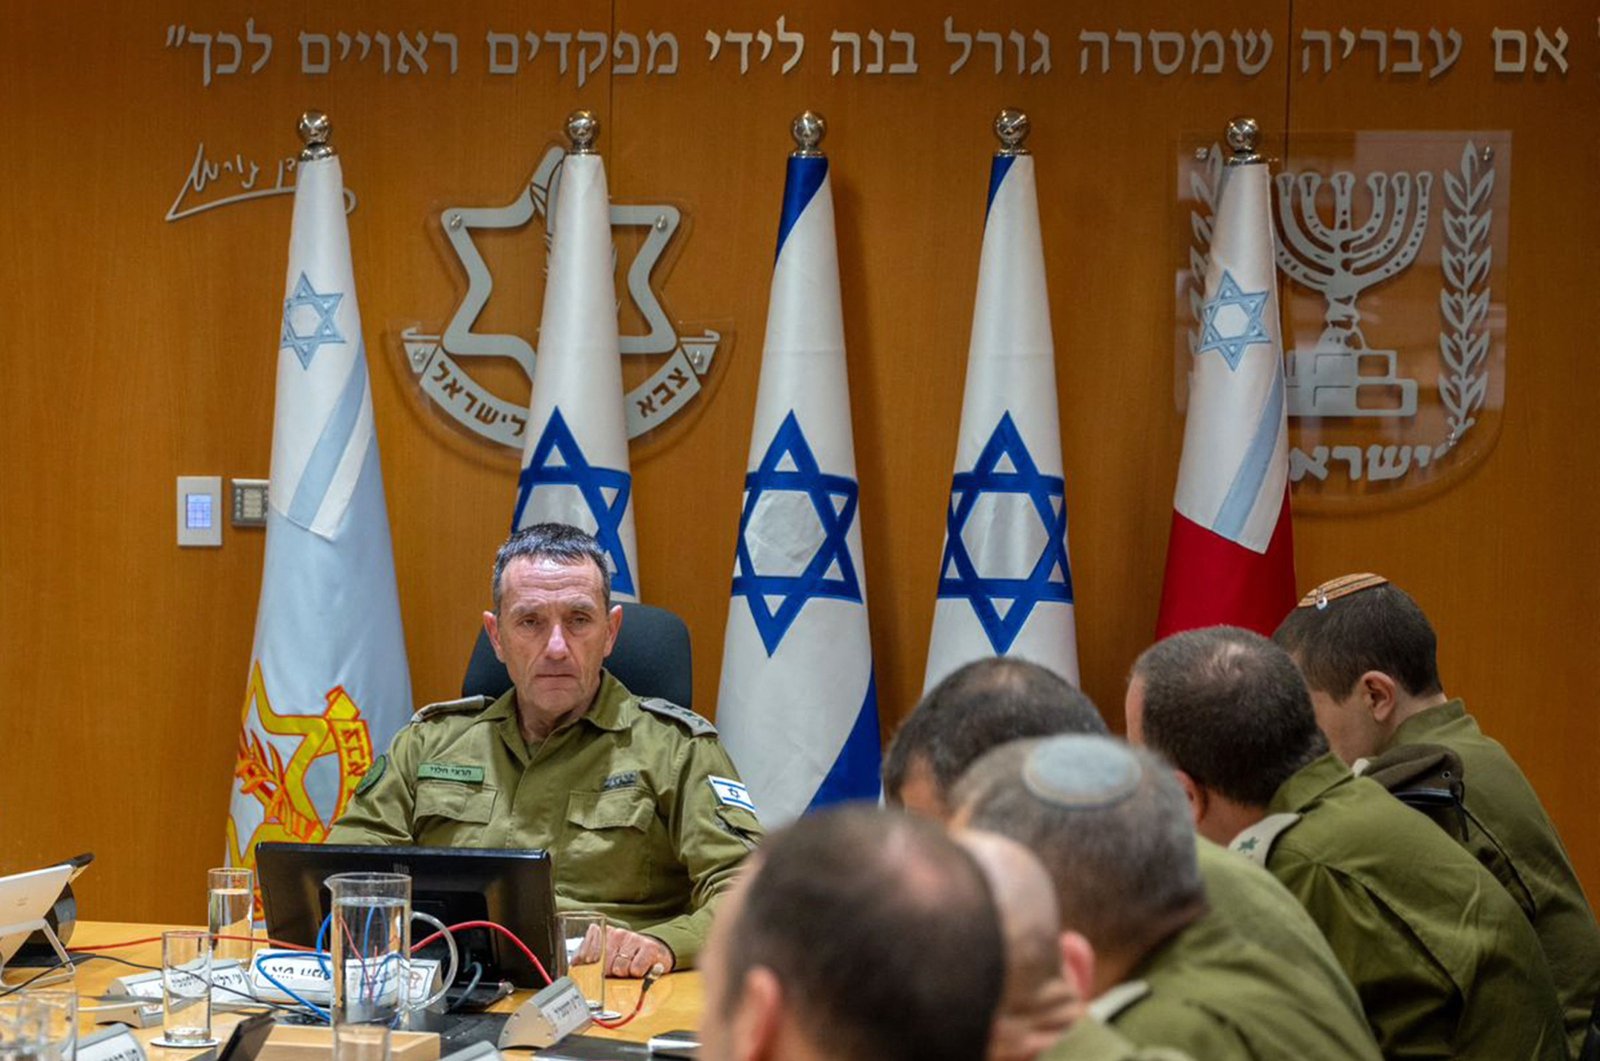 The head of the Israeli military, Lieutenant General Herzi Halevi attends a situational assessment with members of the General Staff Forum at the Kirya military base, which houses the Defense Ministry in Tel Aviv, on April 14, 2024. (AFP Photo/Israeli Army)